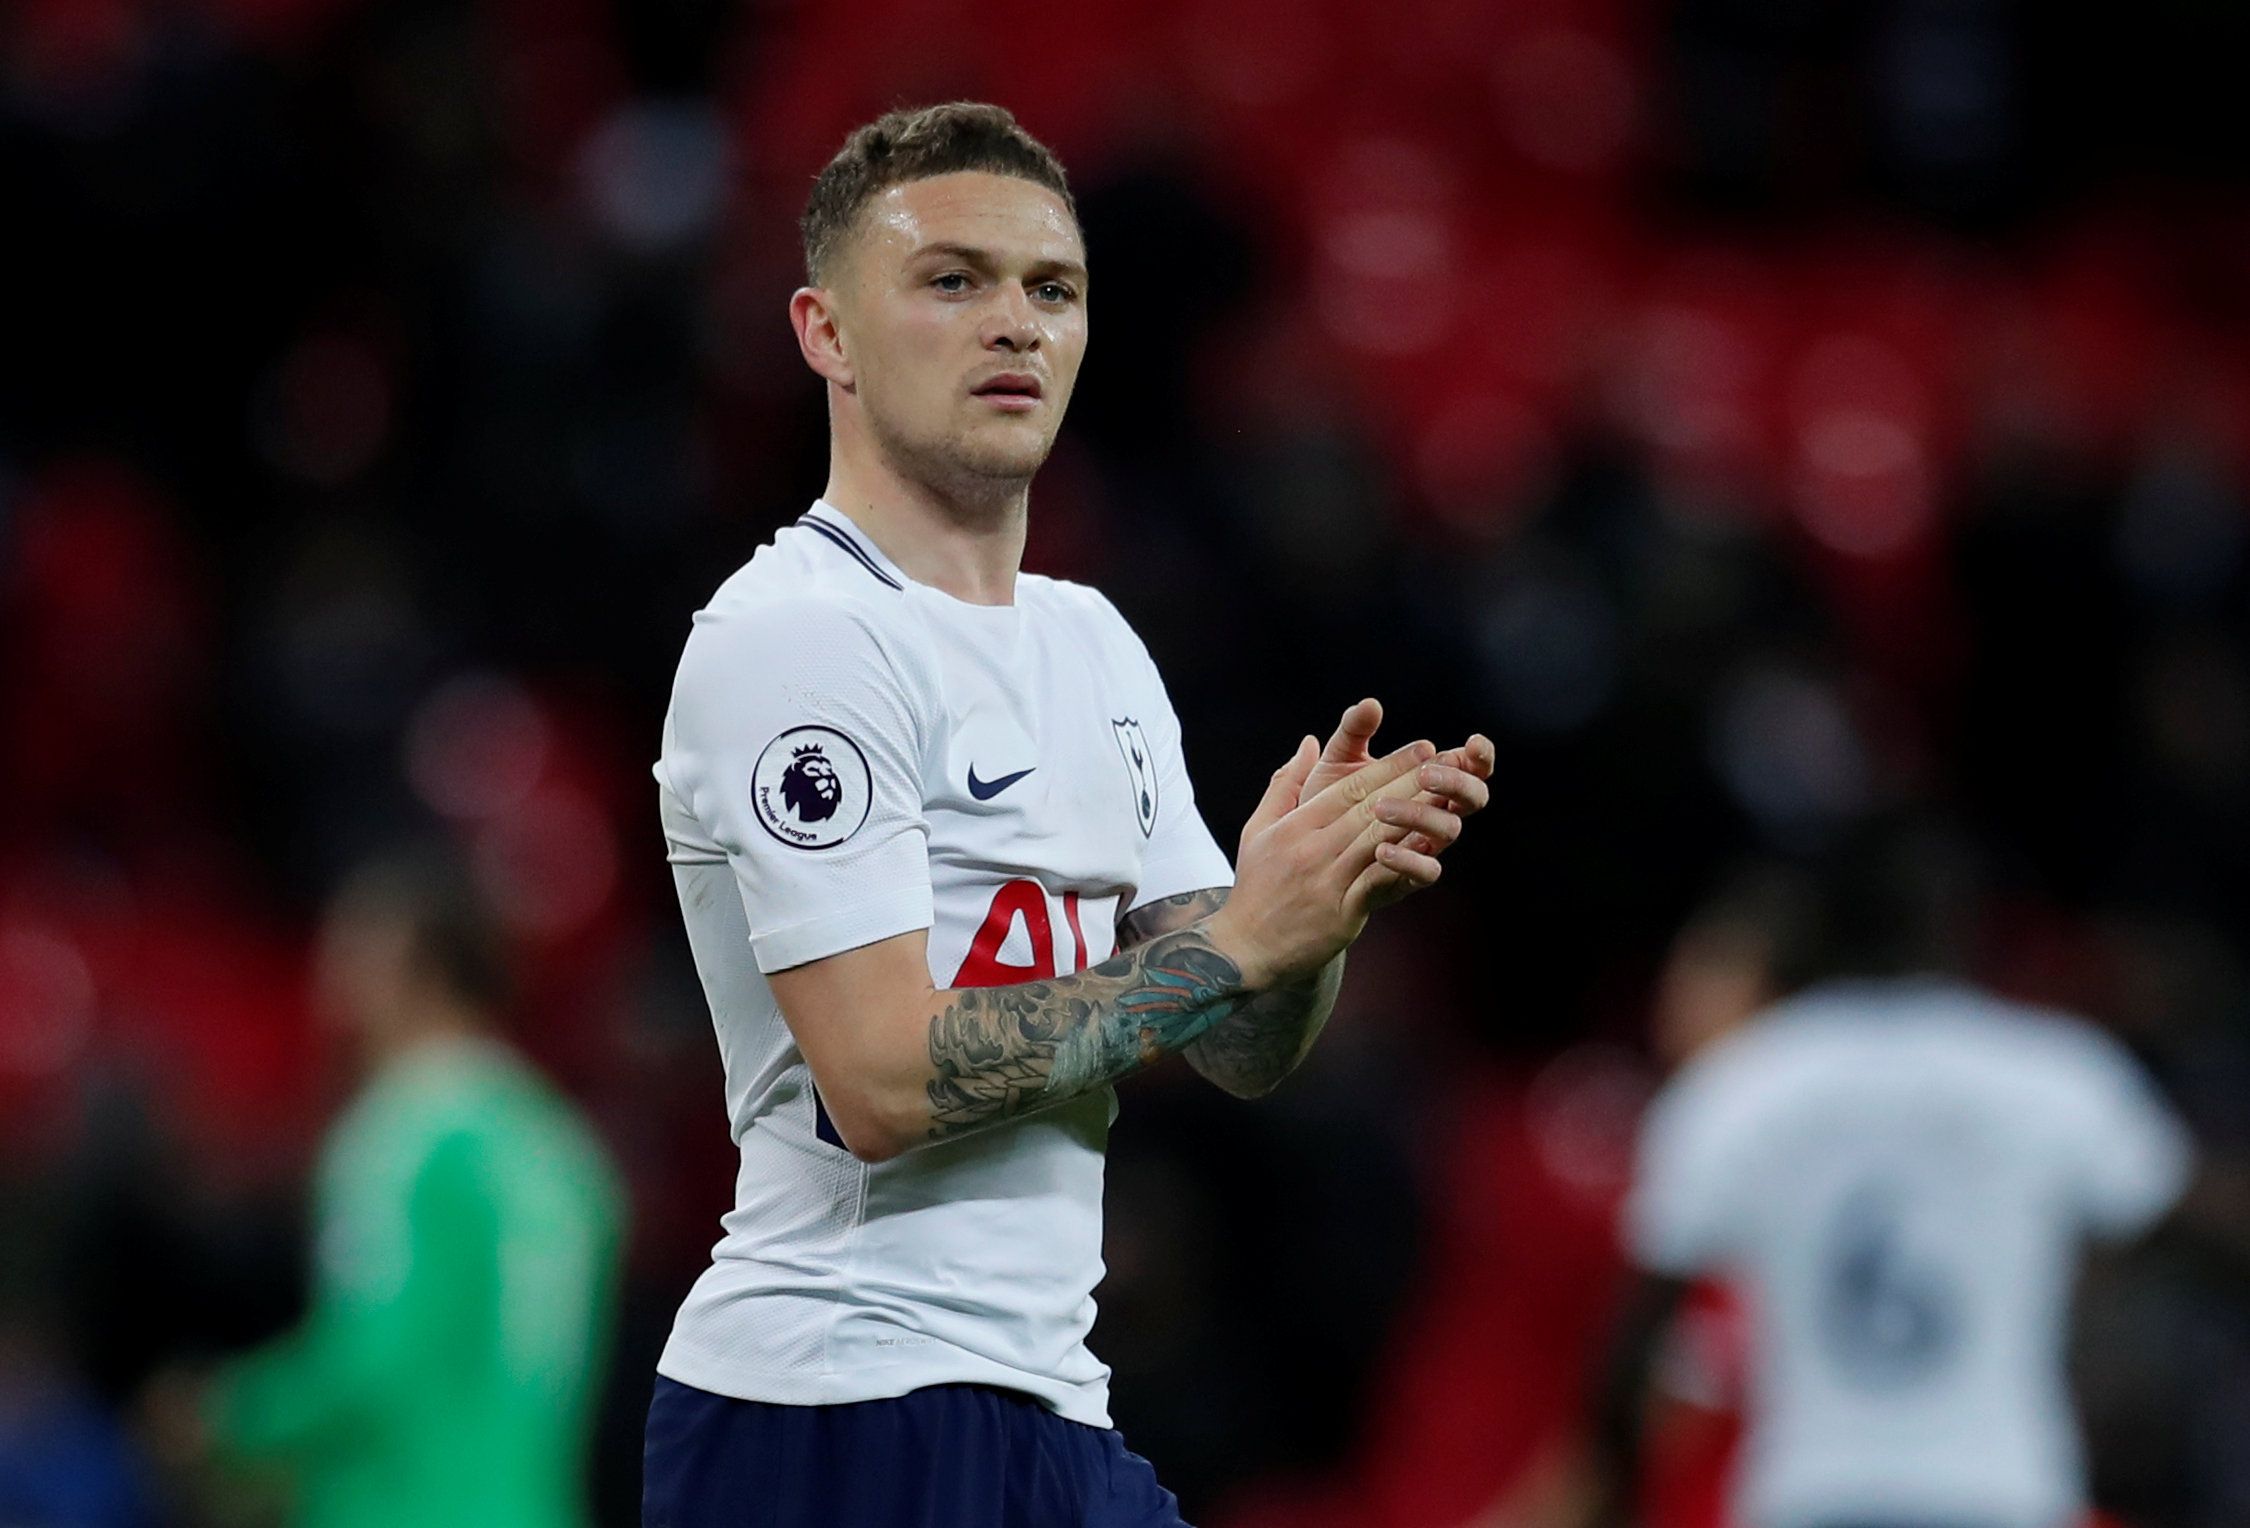 Soccer Football - Premier League - Tottenham Hotspur vs Manchester United - Wembley Stadium, London, Britain - January 31, 2018   Tottenham's Kieran Trippier applauds the fans after the match     Action Images via Reuters/Andrew Couldridge    EDITORIAL USE ONLY. No use with unauthorized audio, video, data, fixture lists, club/league logos or 